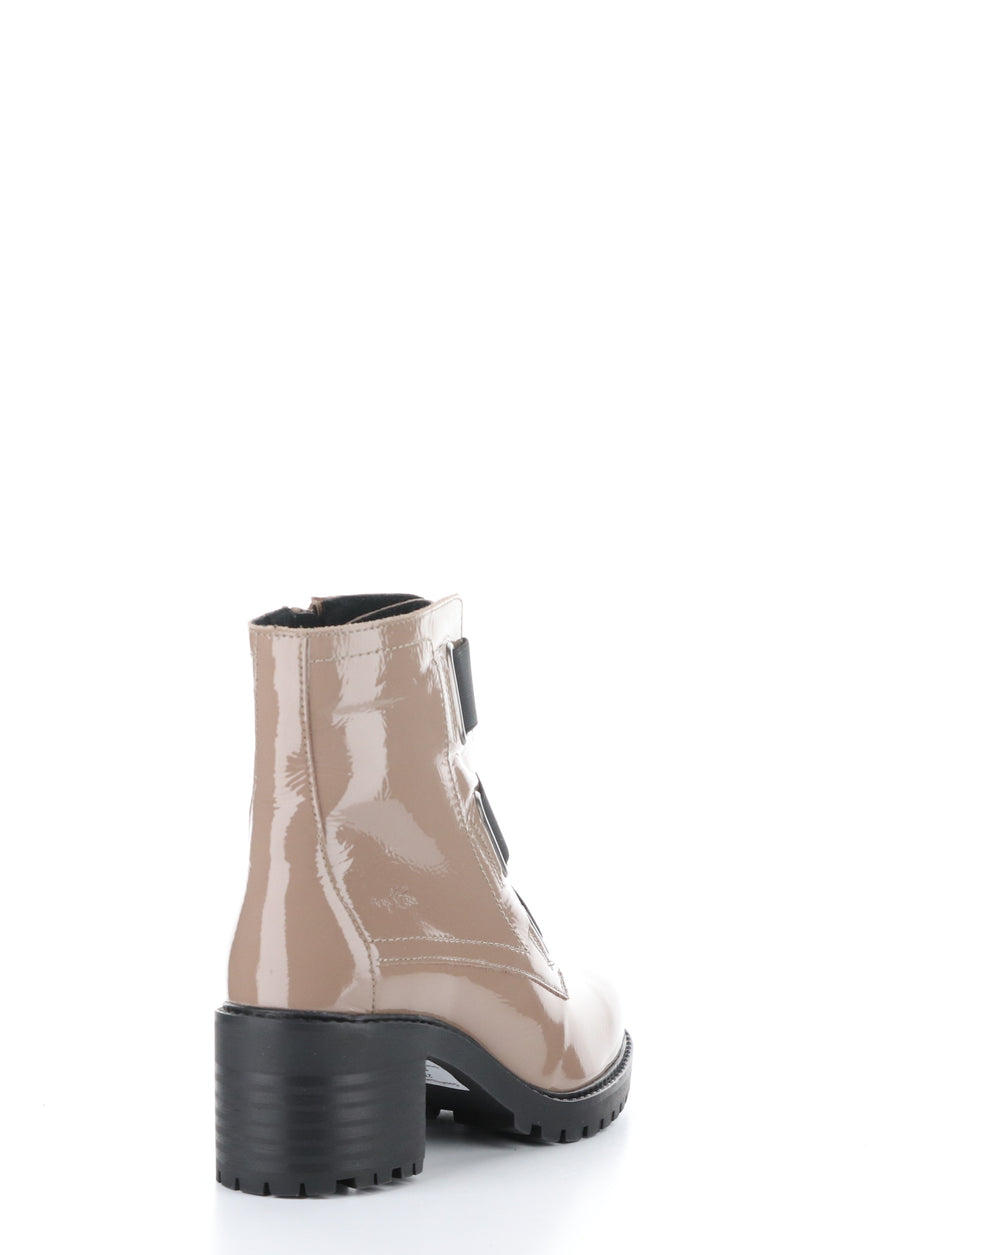 INDIE CAPPUCCINO Elasticated Boots